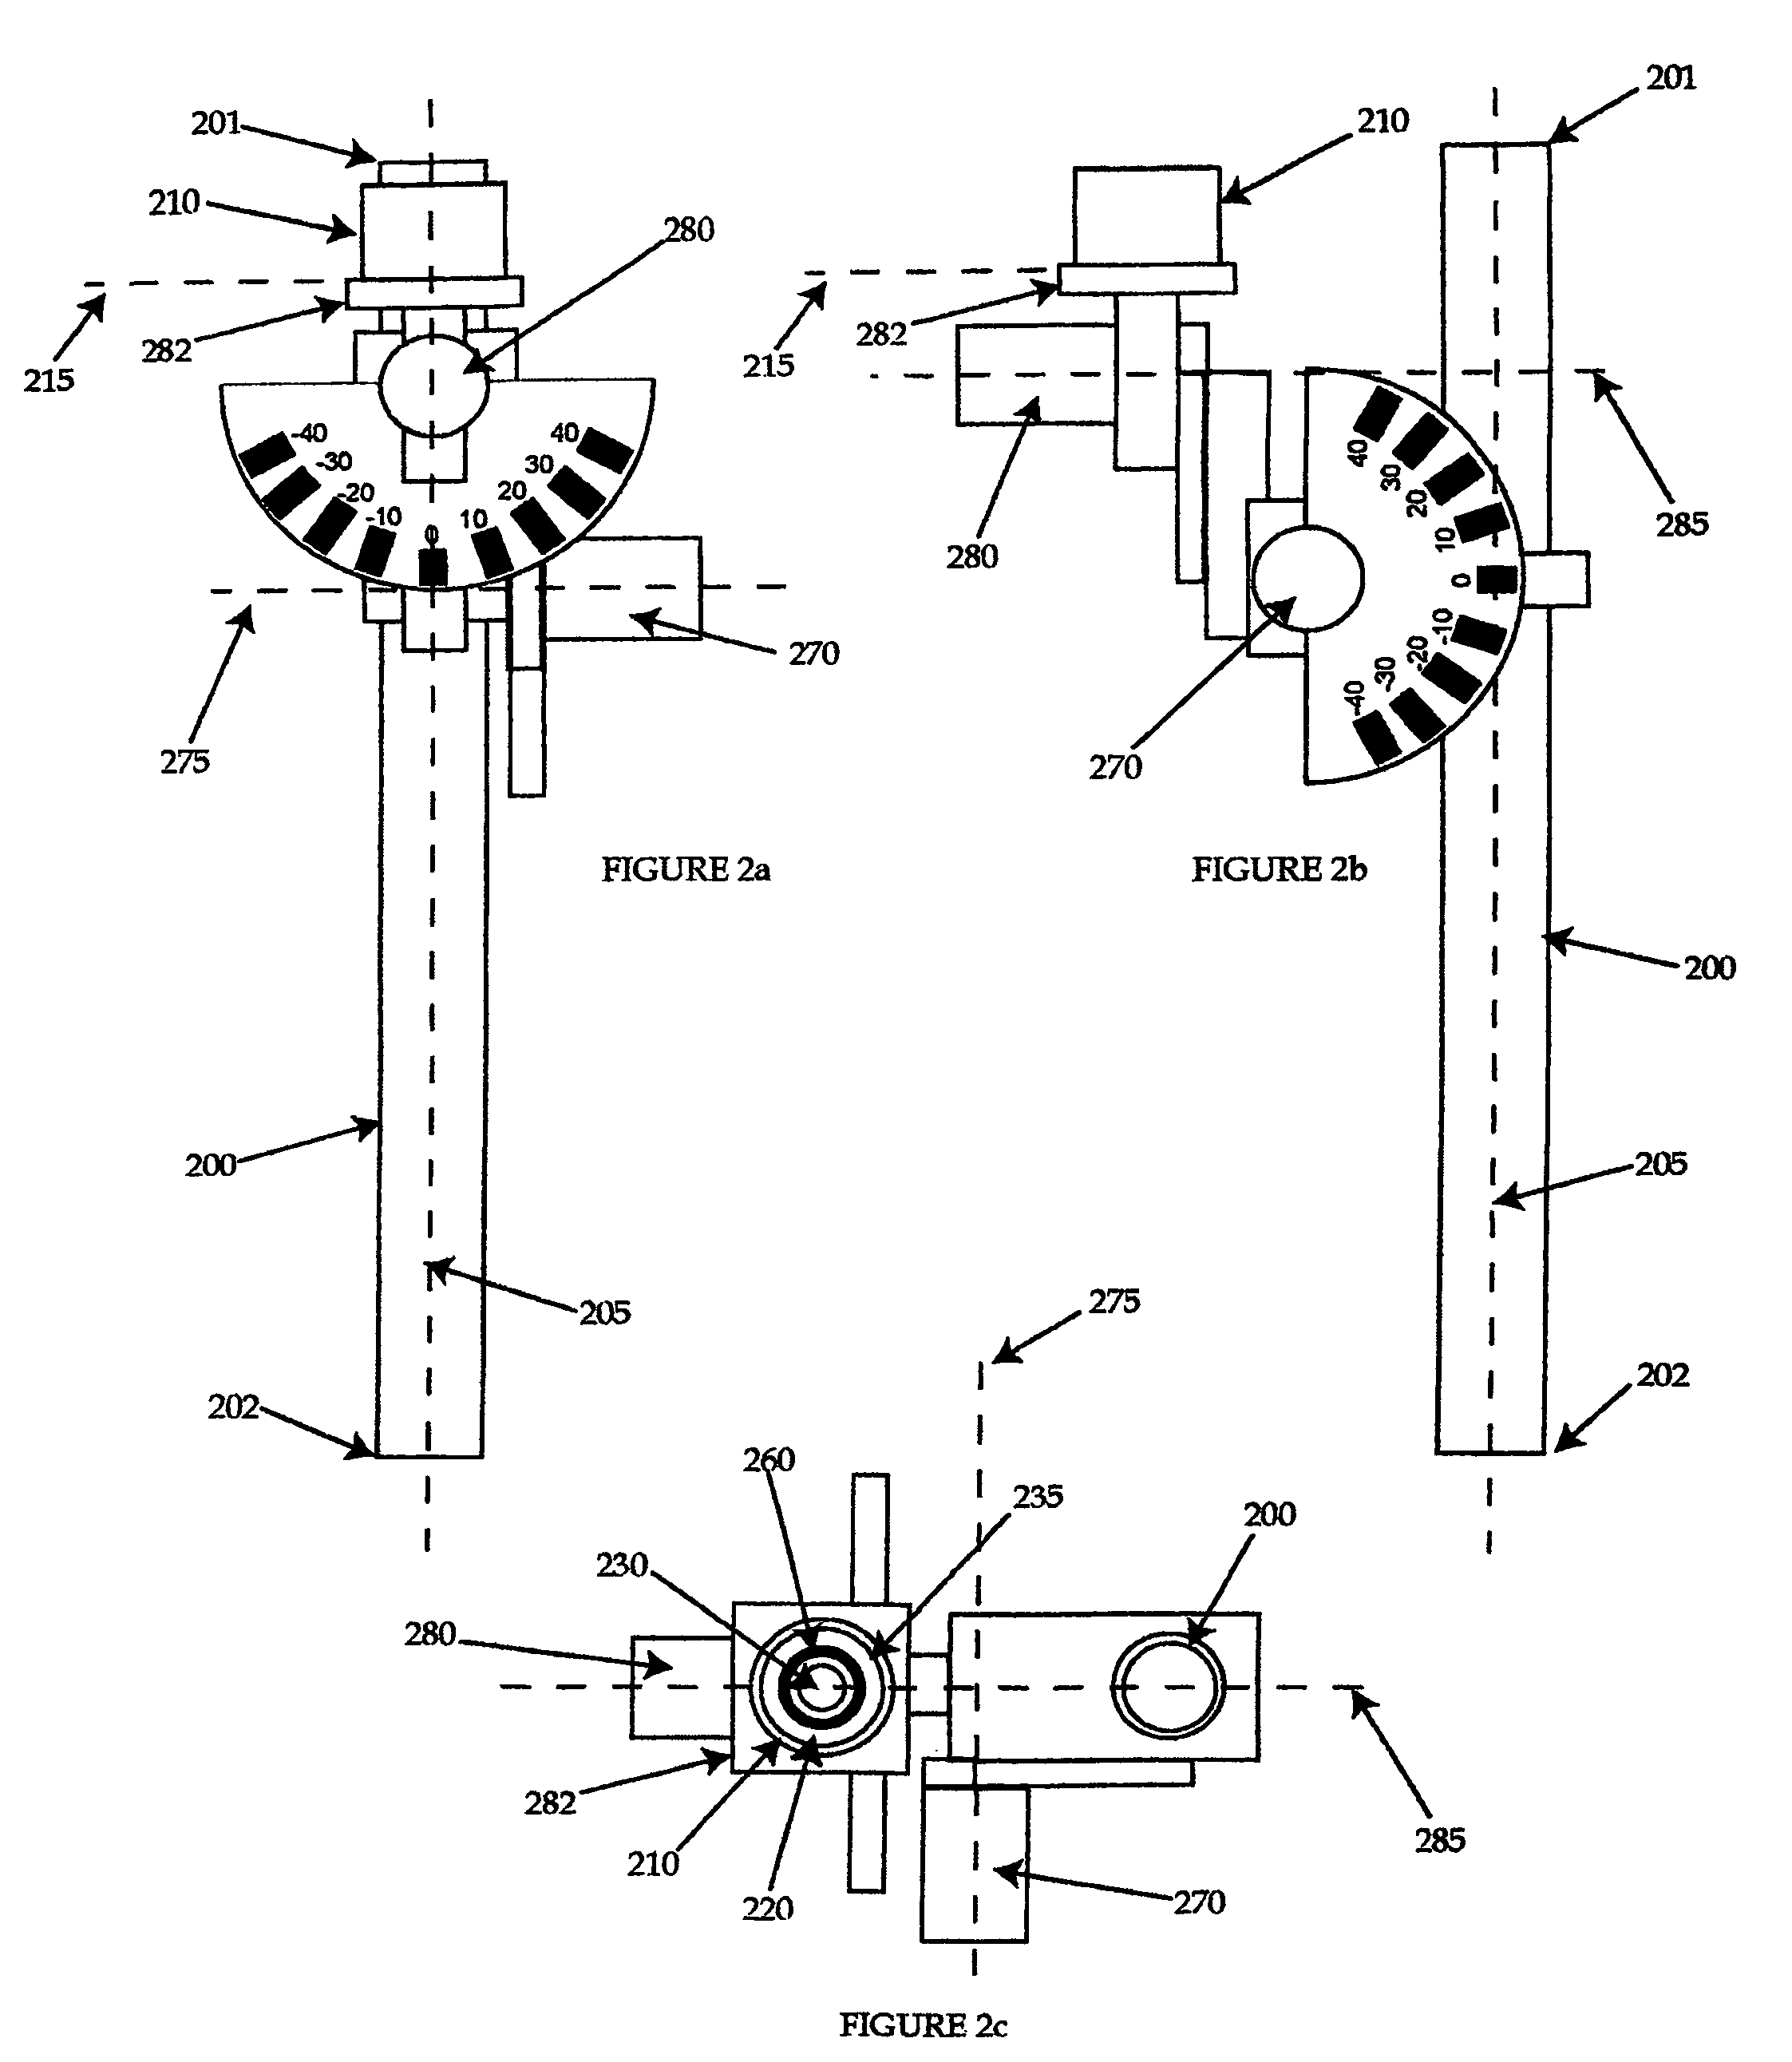 Gravity dependent pedicle screw tap hole guide and data processing device